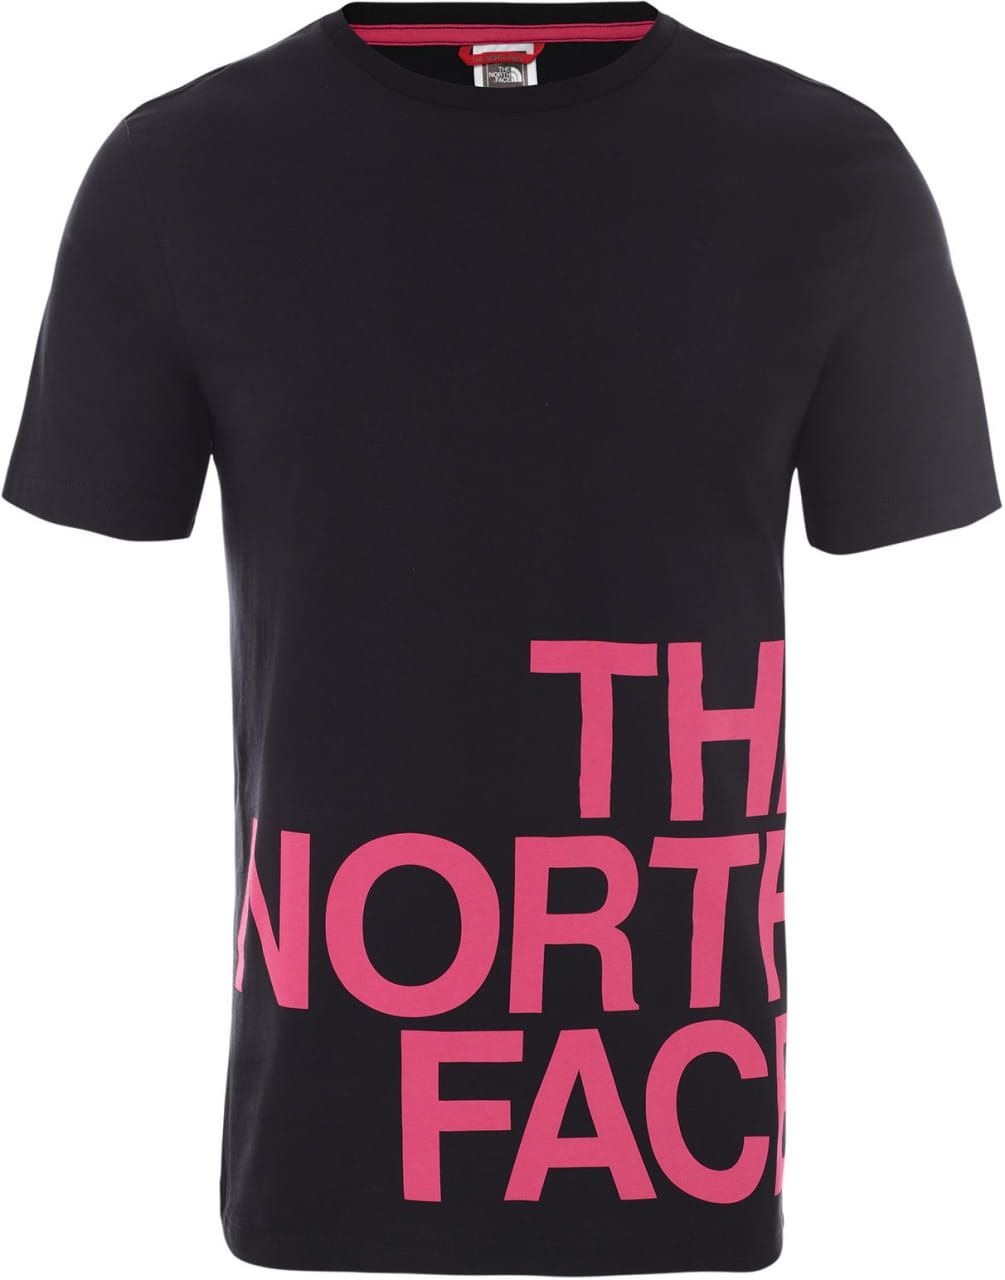 T-Shirts The North Face Men's Graphic Flow 1 T-Shirt